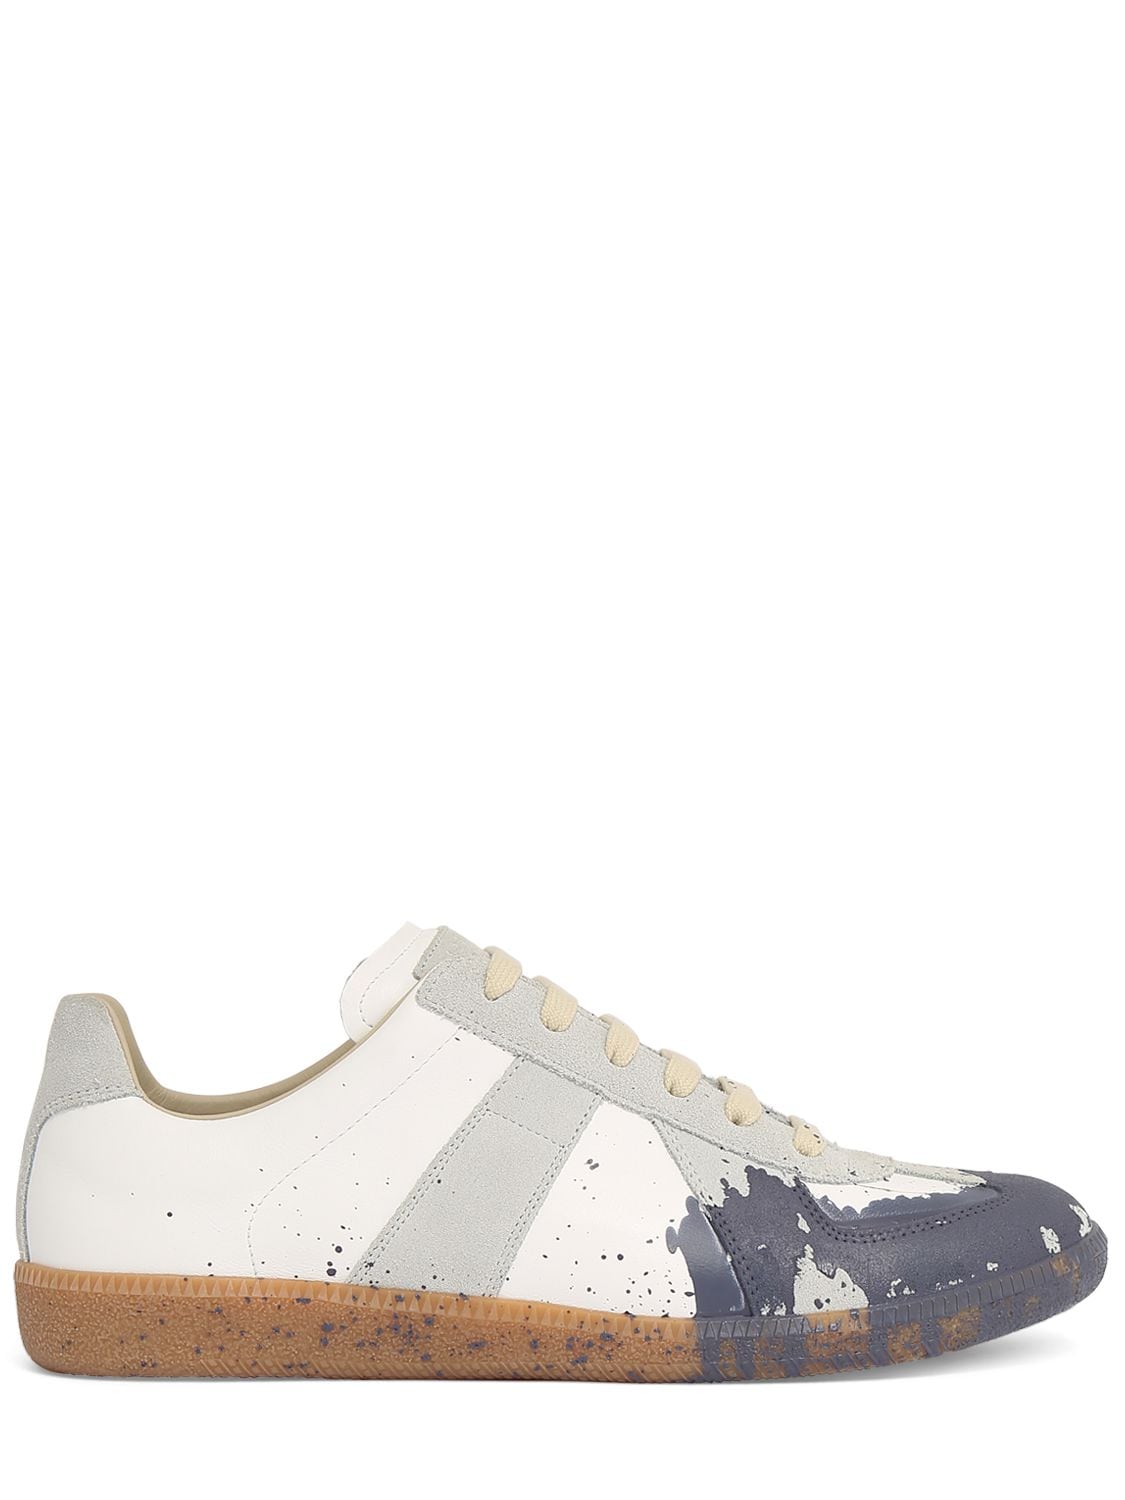 Maison Margiela Replica Painted Leather Low Top Sneakers In White,pewter